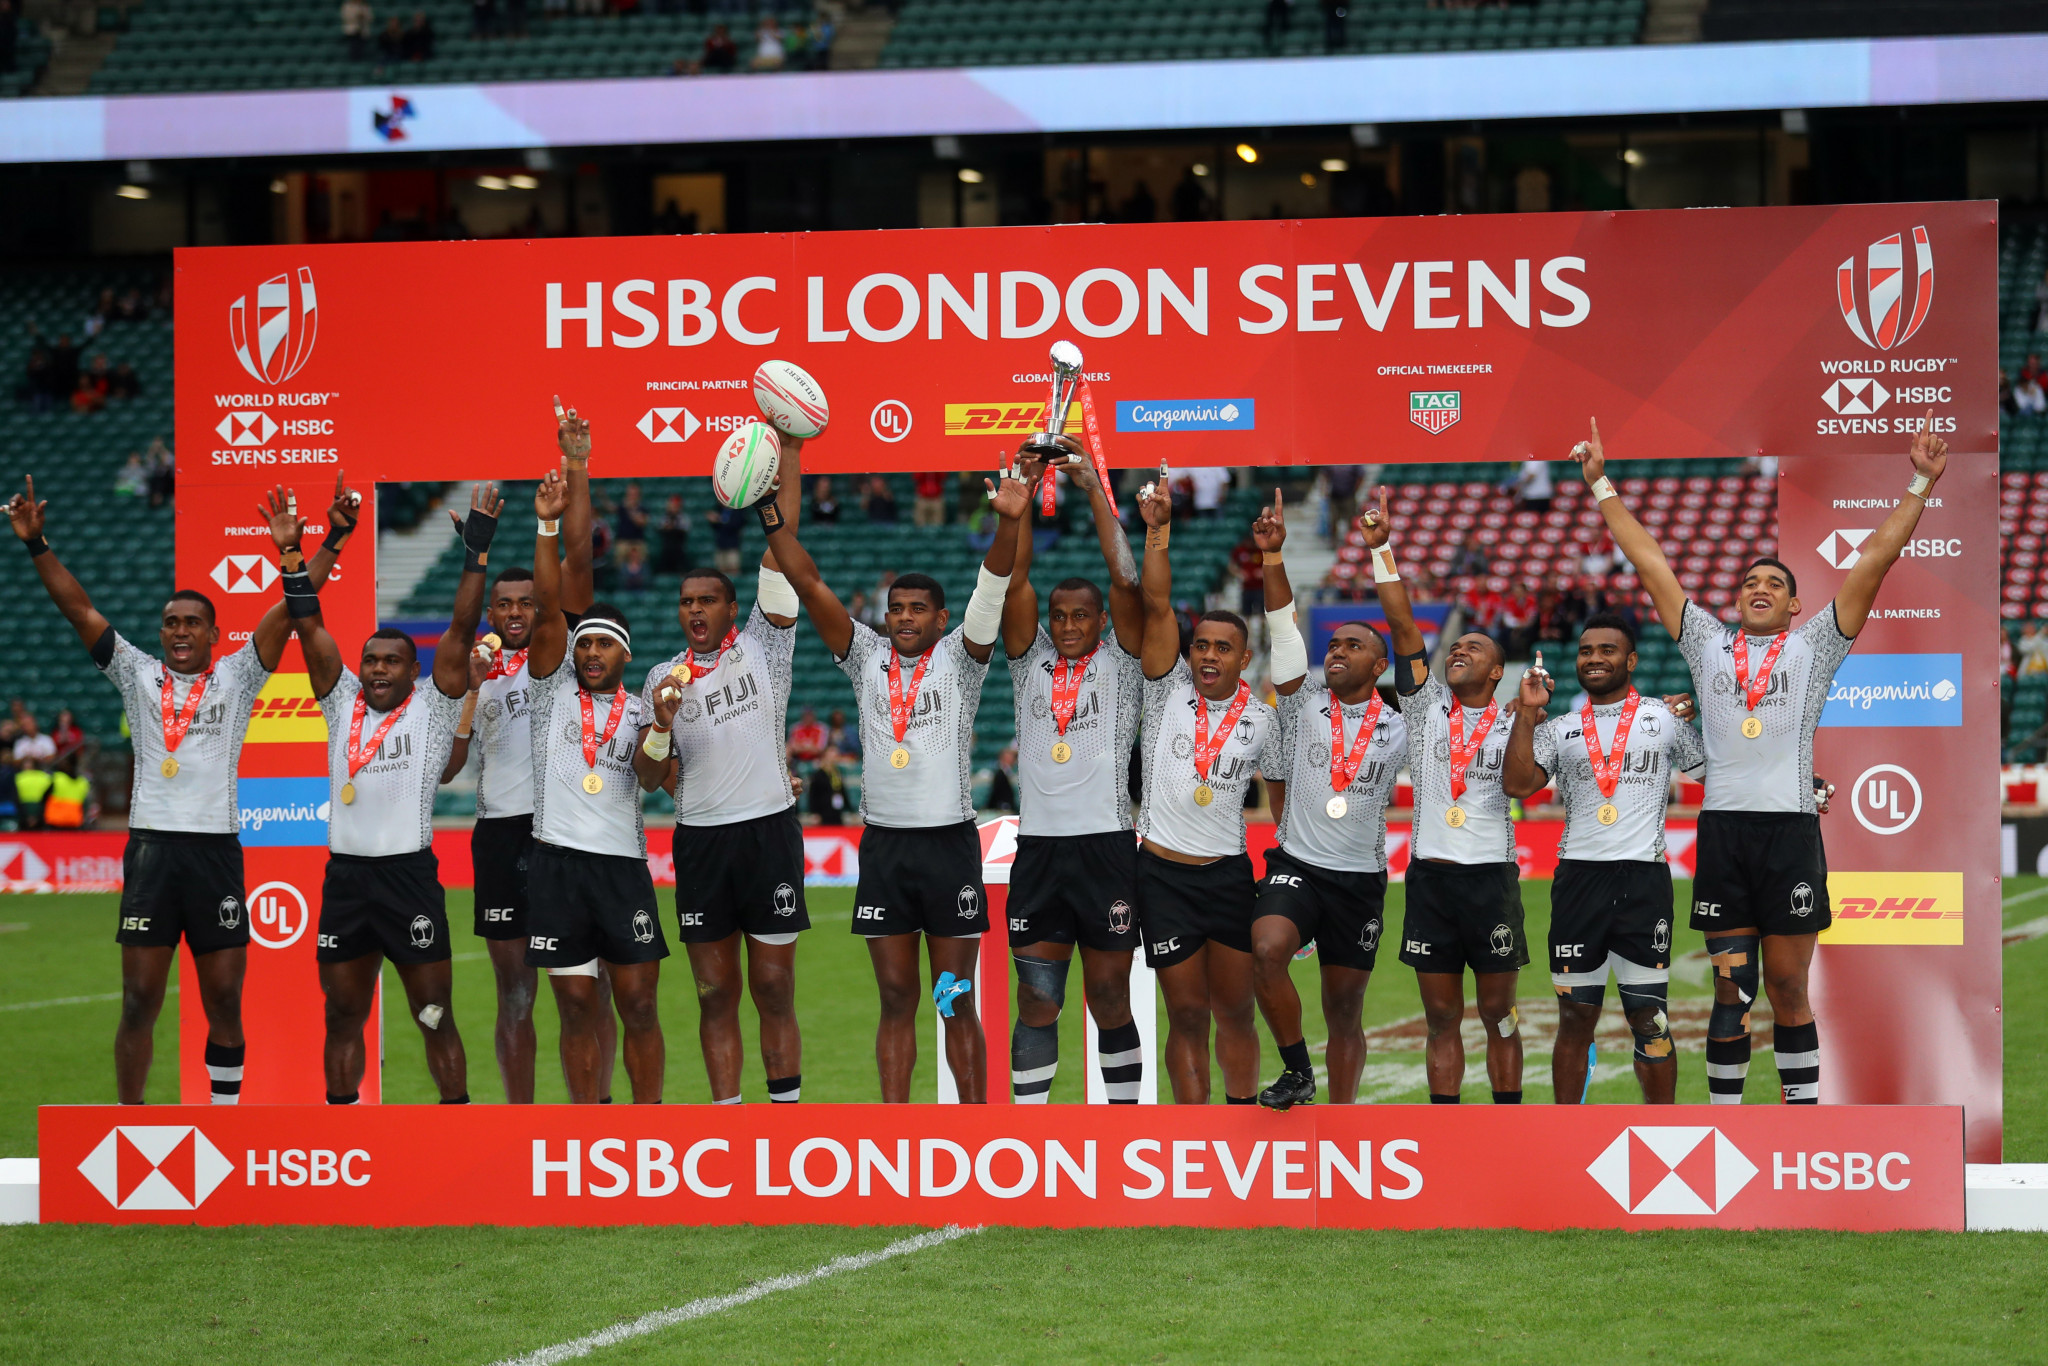 Fiji successfully defended their London Sevens title ©Getty Images